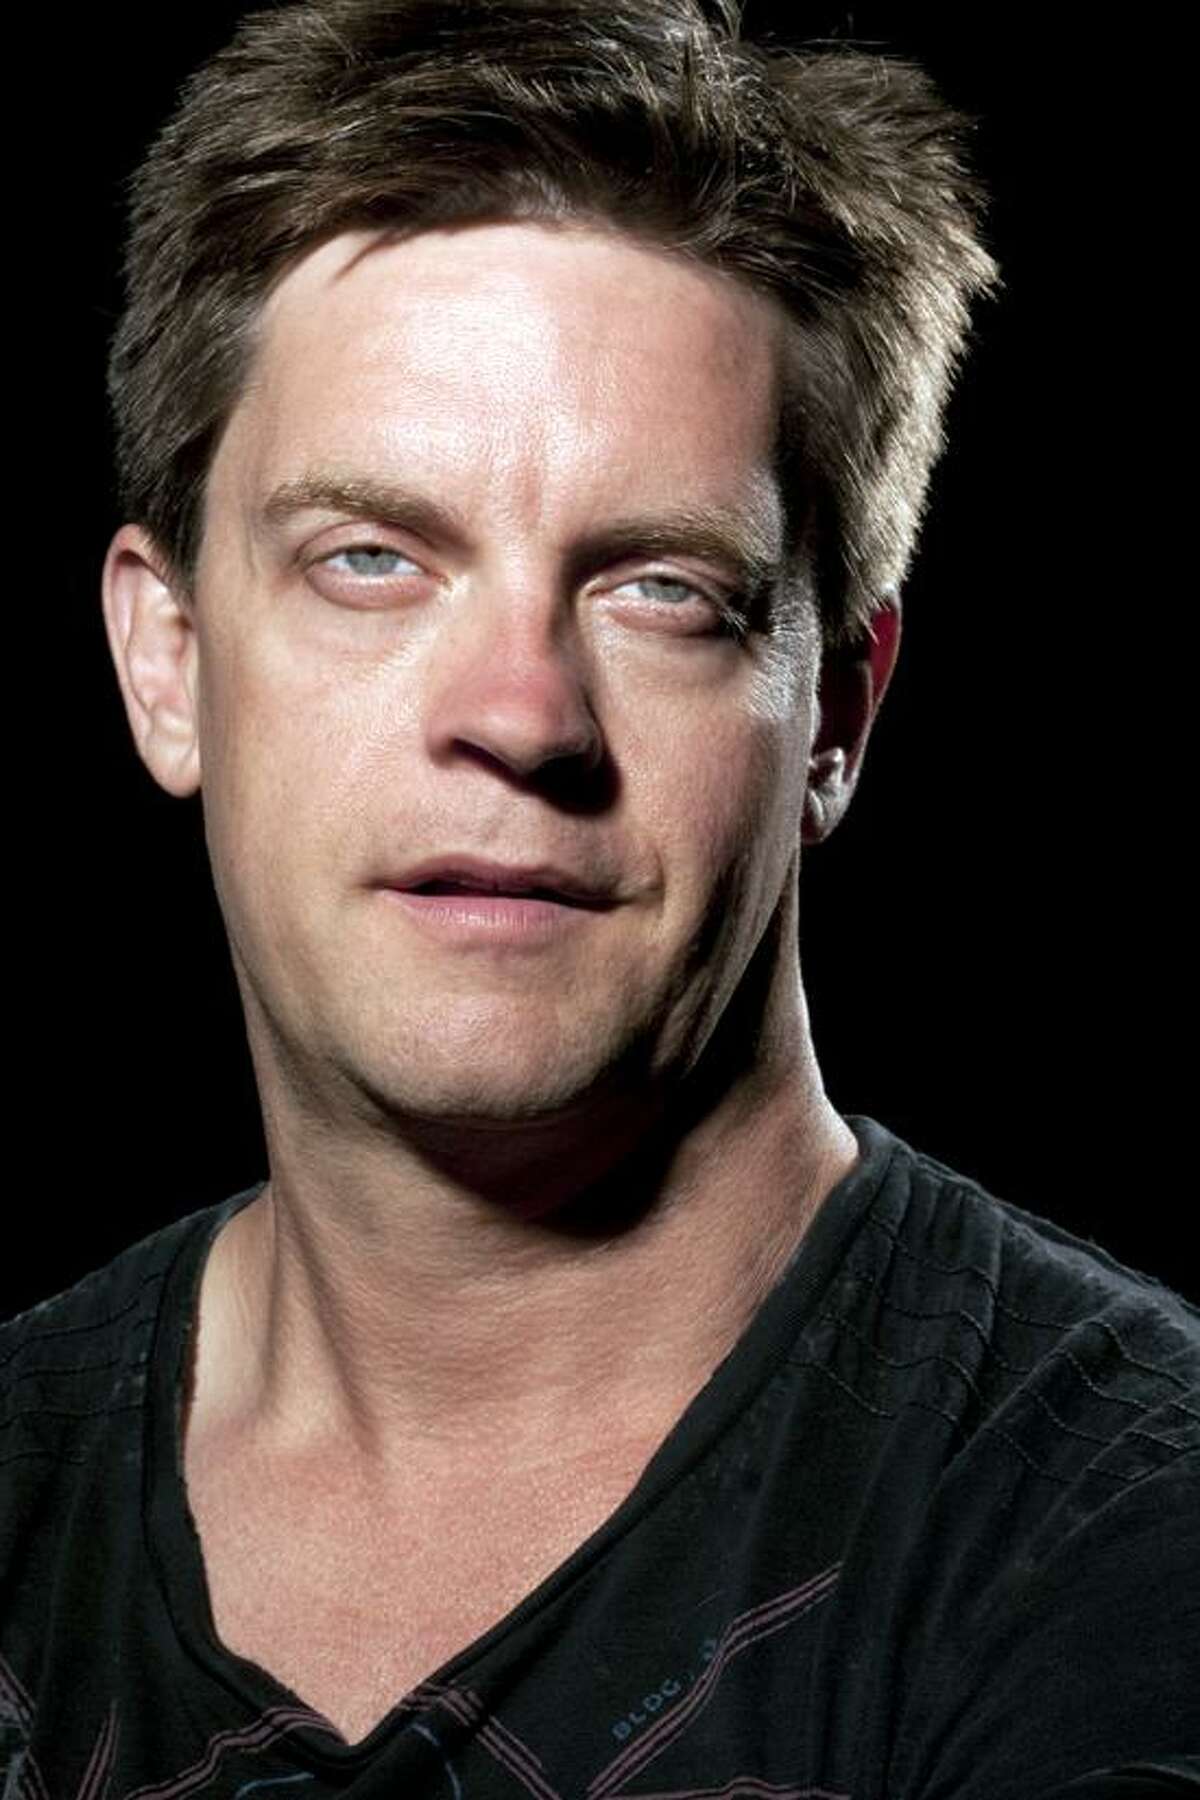 Contributed photo: Jim Breuer of "Saturday Night Live" fame is at Foxwoods Saturday night.